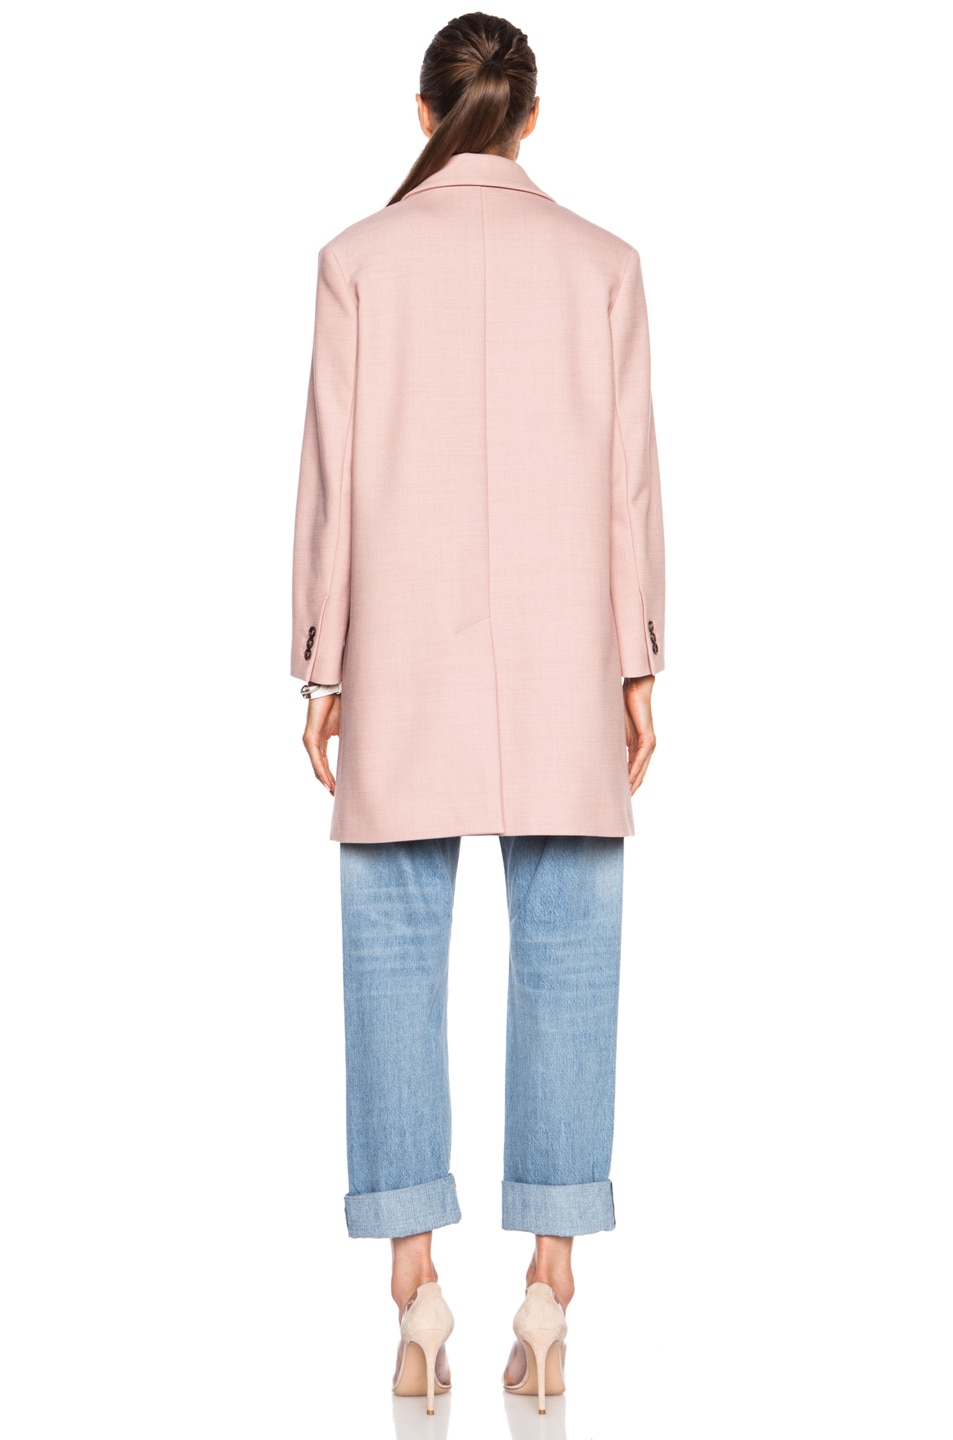 Red Valentino Wool-Blend Coat in Nude | FWRD